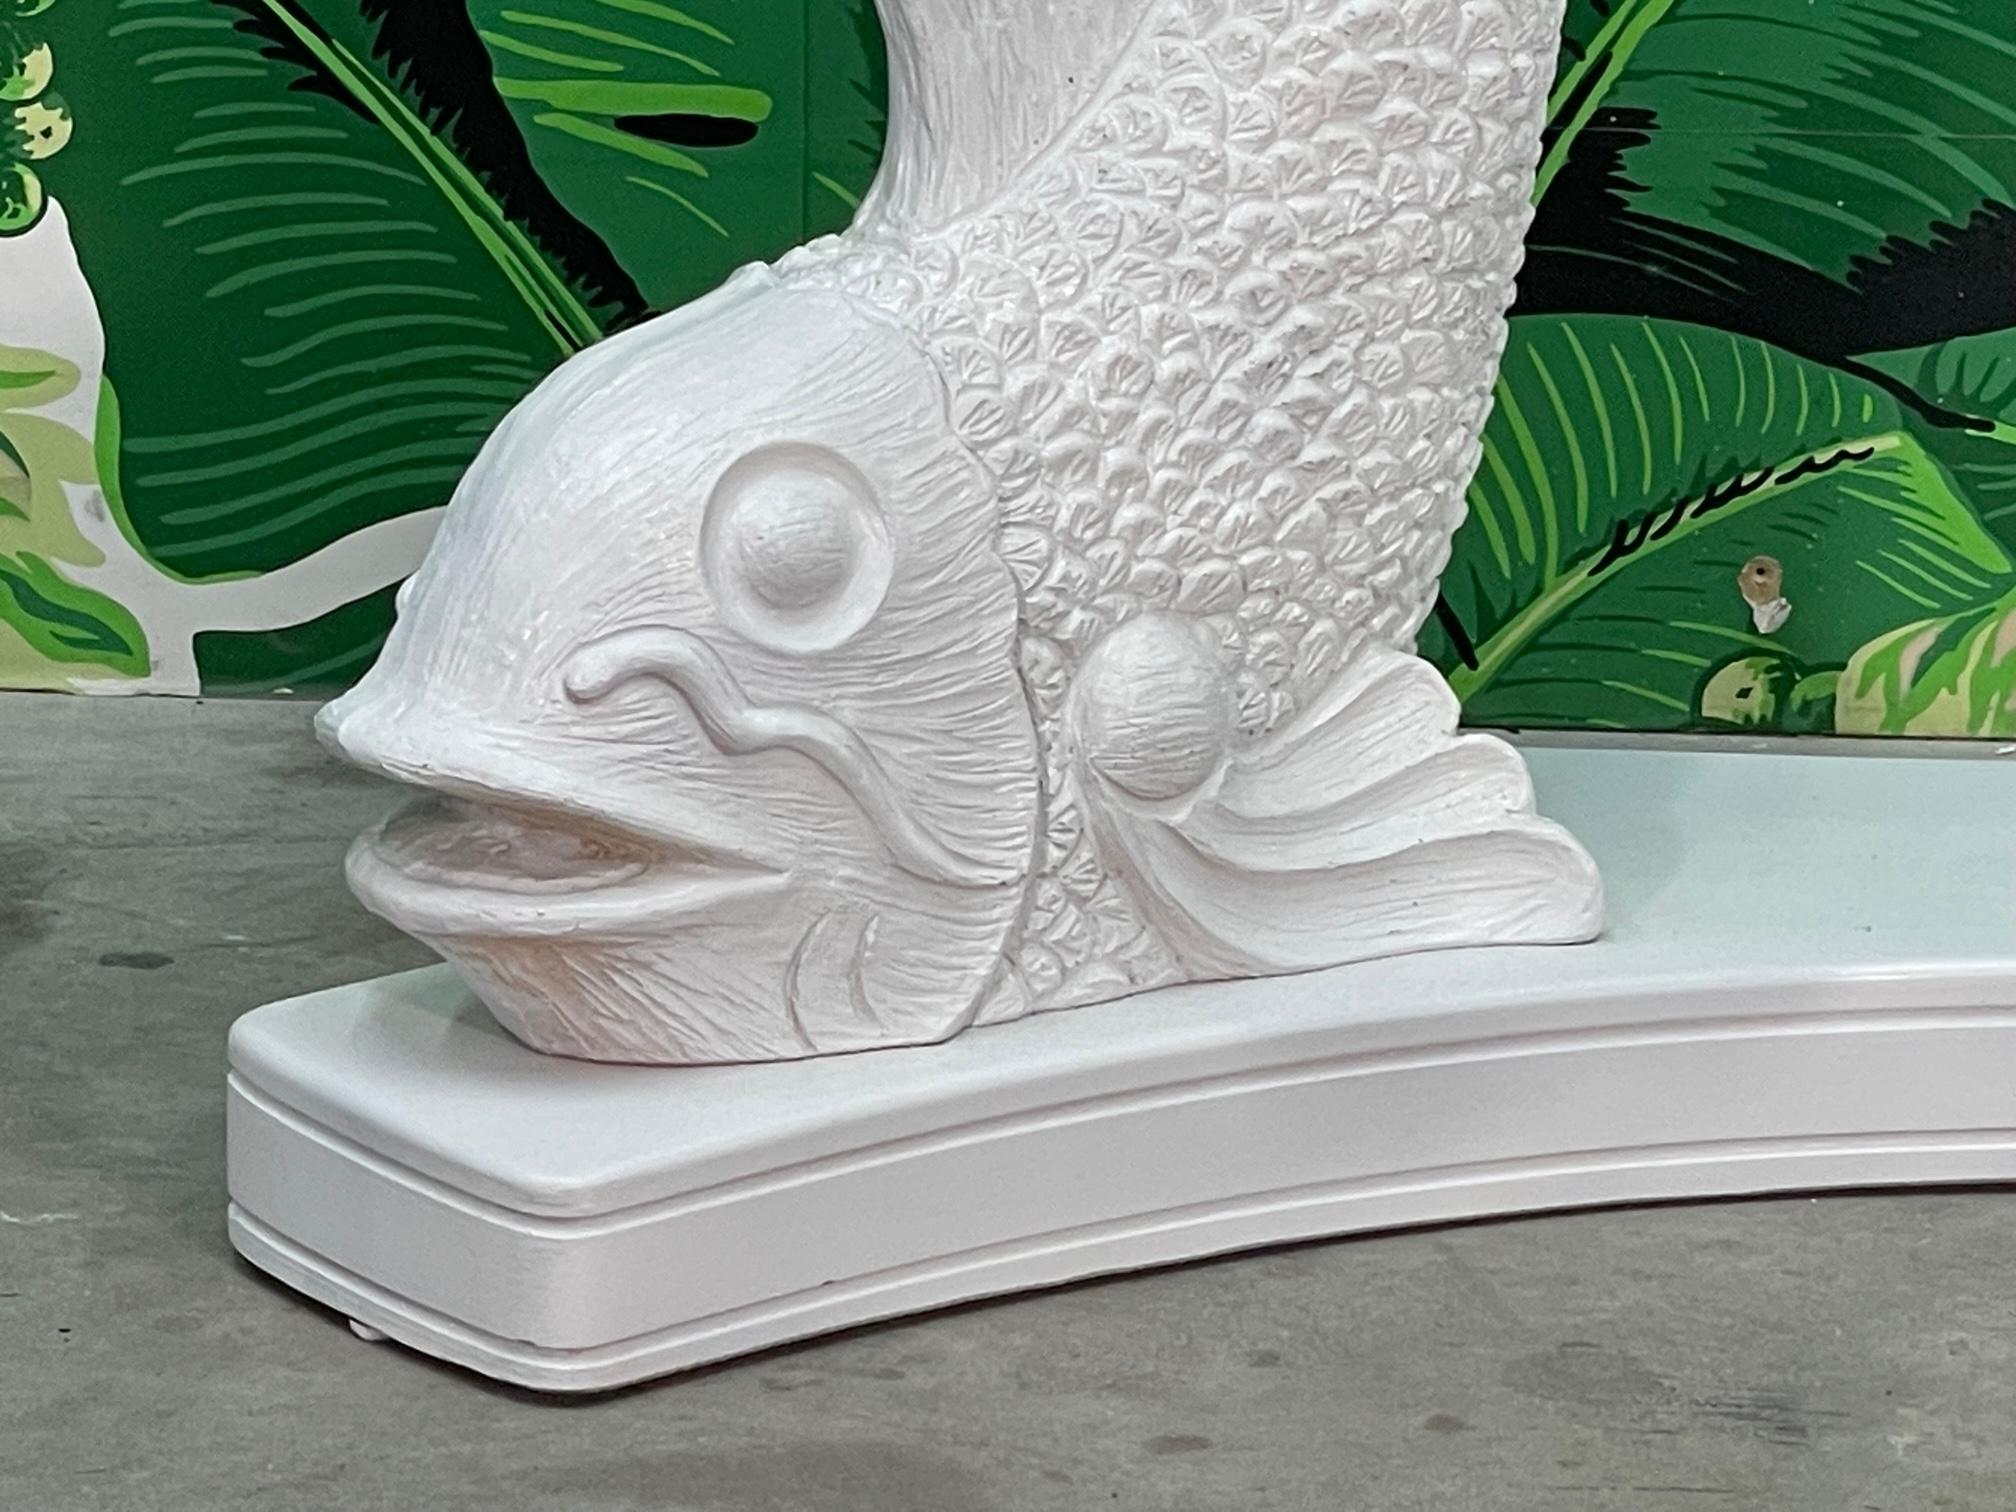 Japanese Koi Fish Sculptural Console Table 2